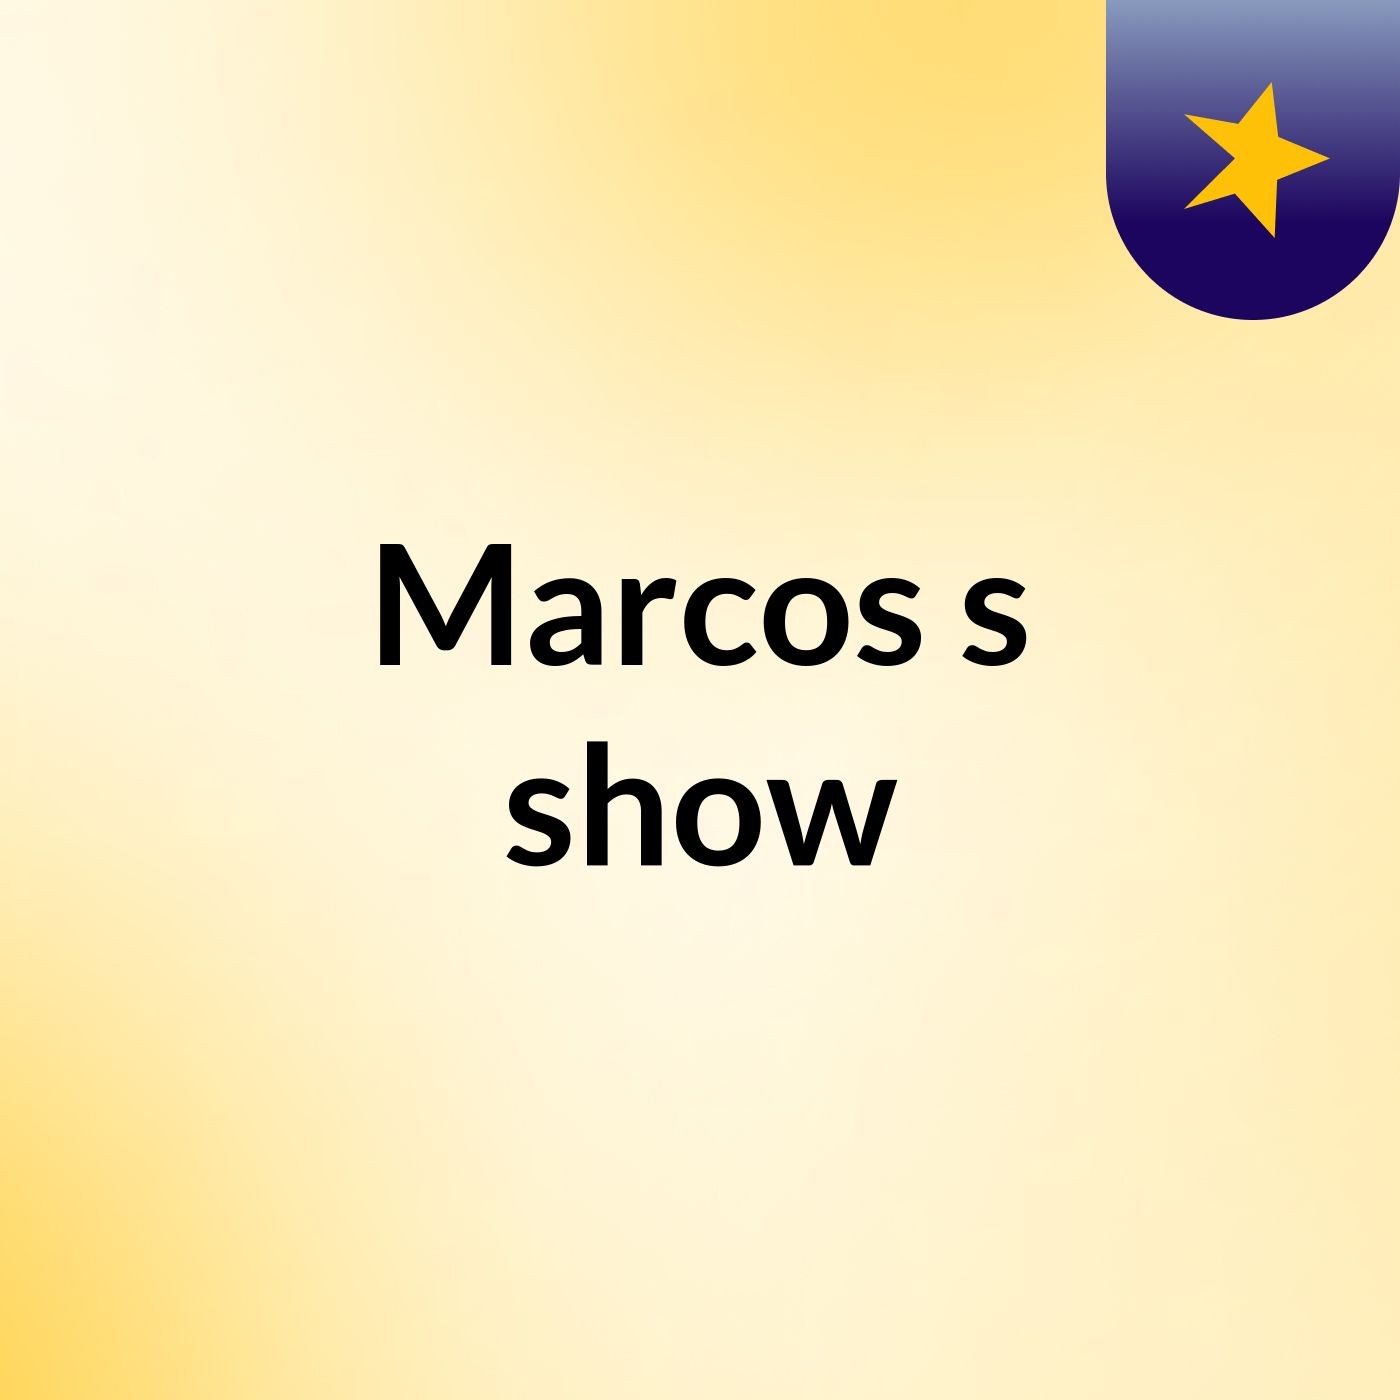 Marcos's show